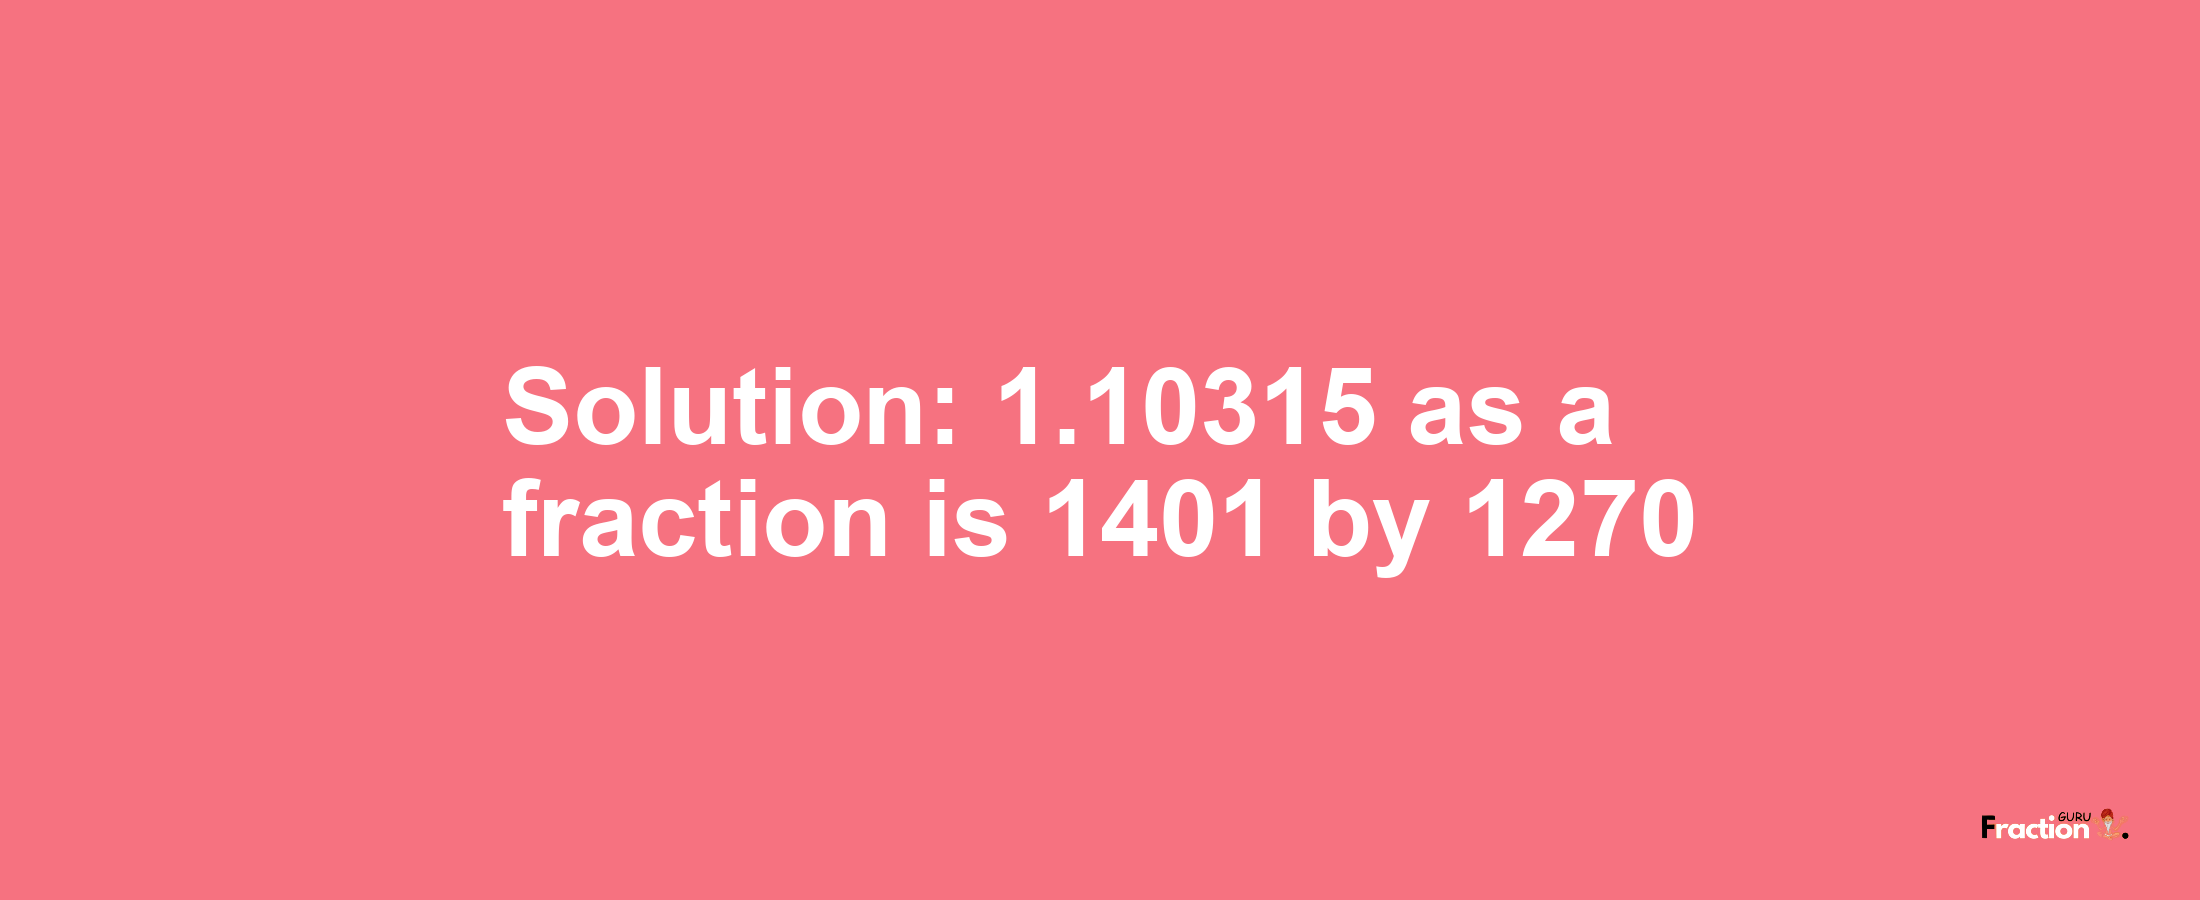 Solution:1.10315 as a fraction is 1401/1270